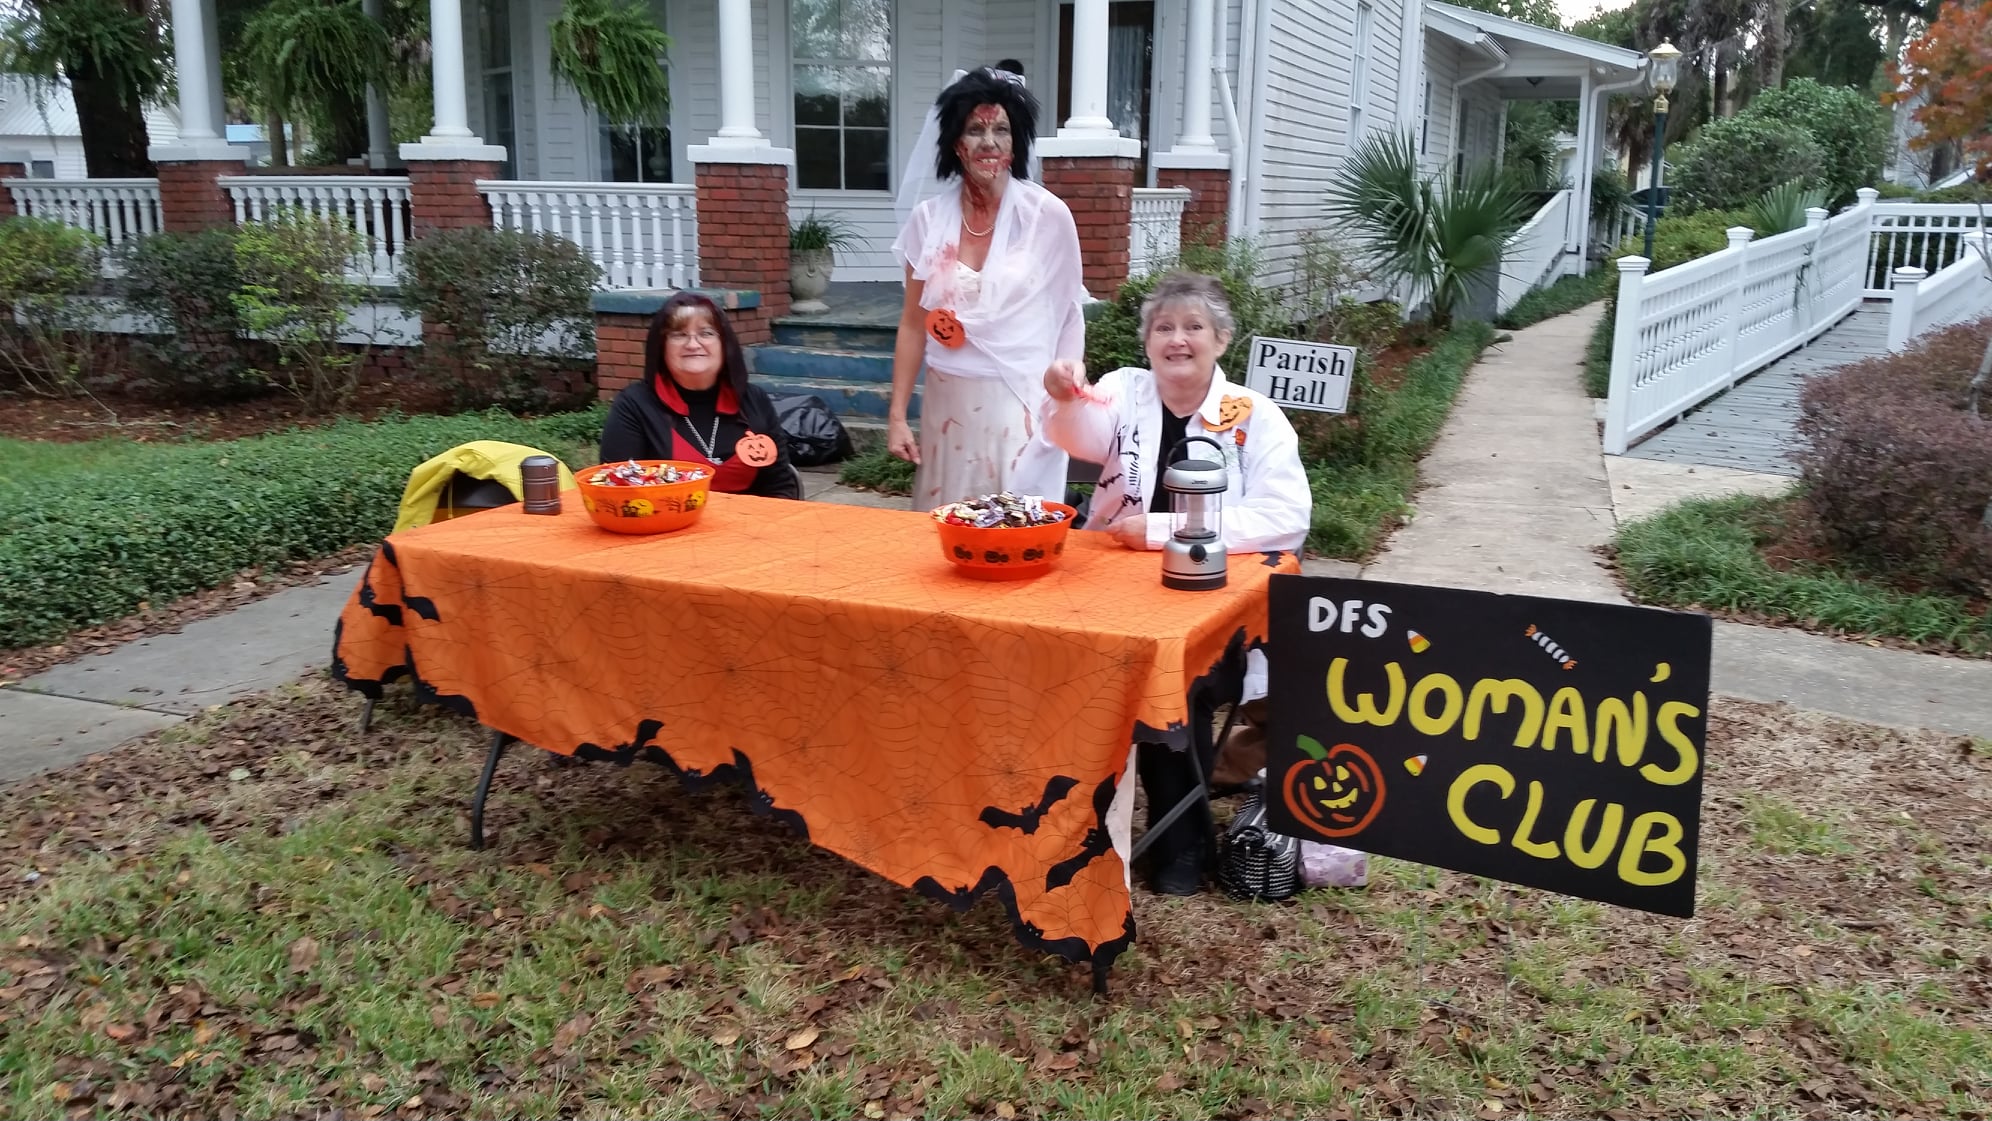 Trick or Treating Around the Lake, hosted by the DeFuniak Springs Woman